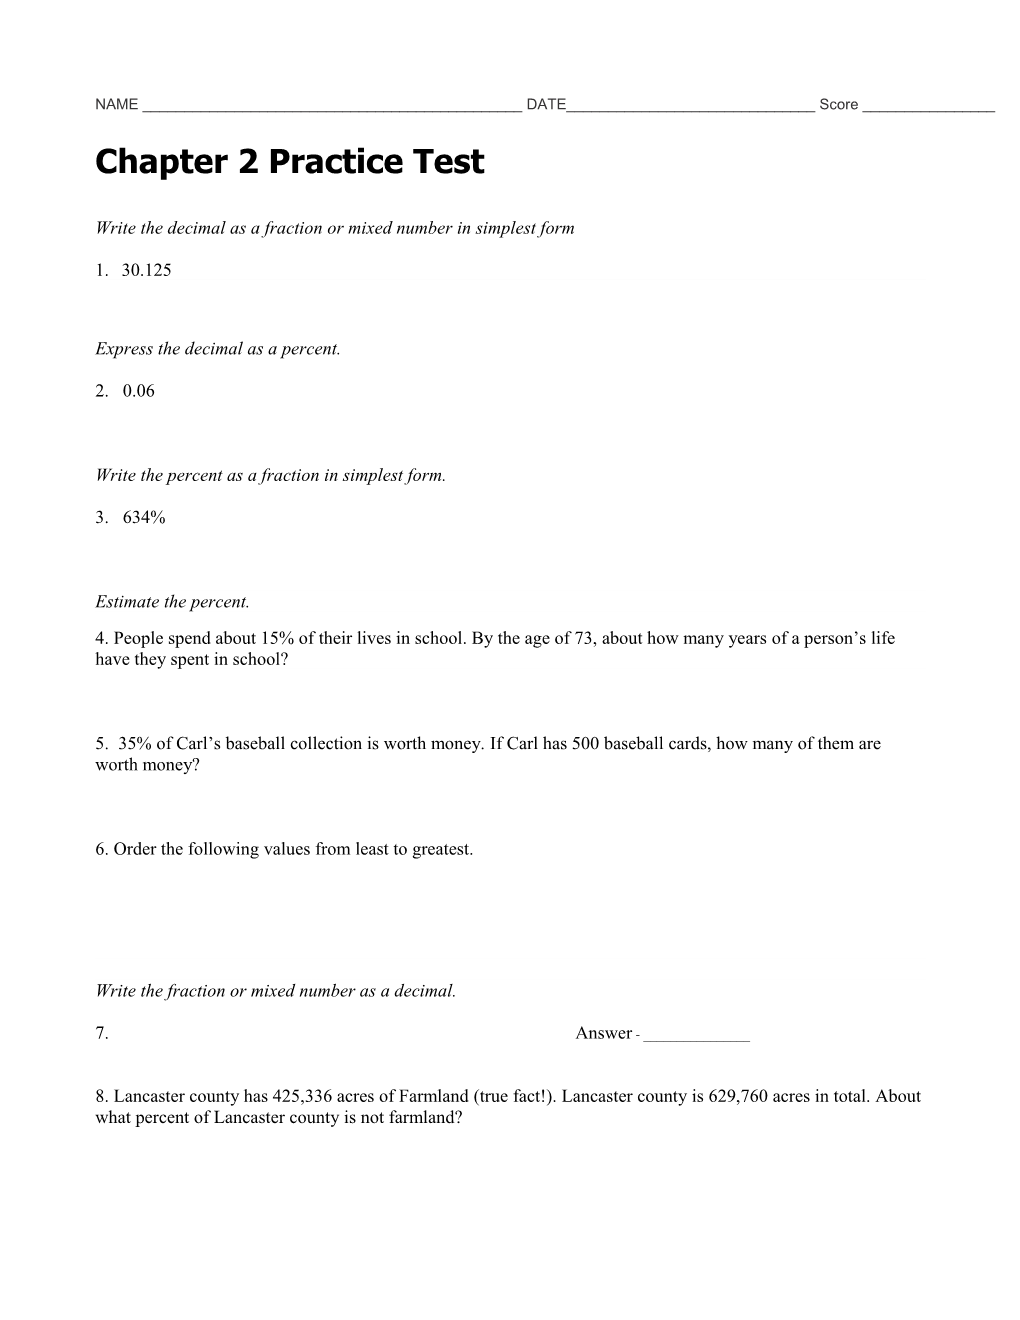 Chapter 2 Practice Test